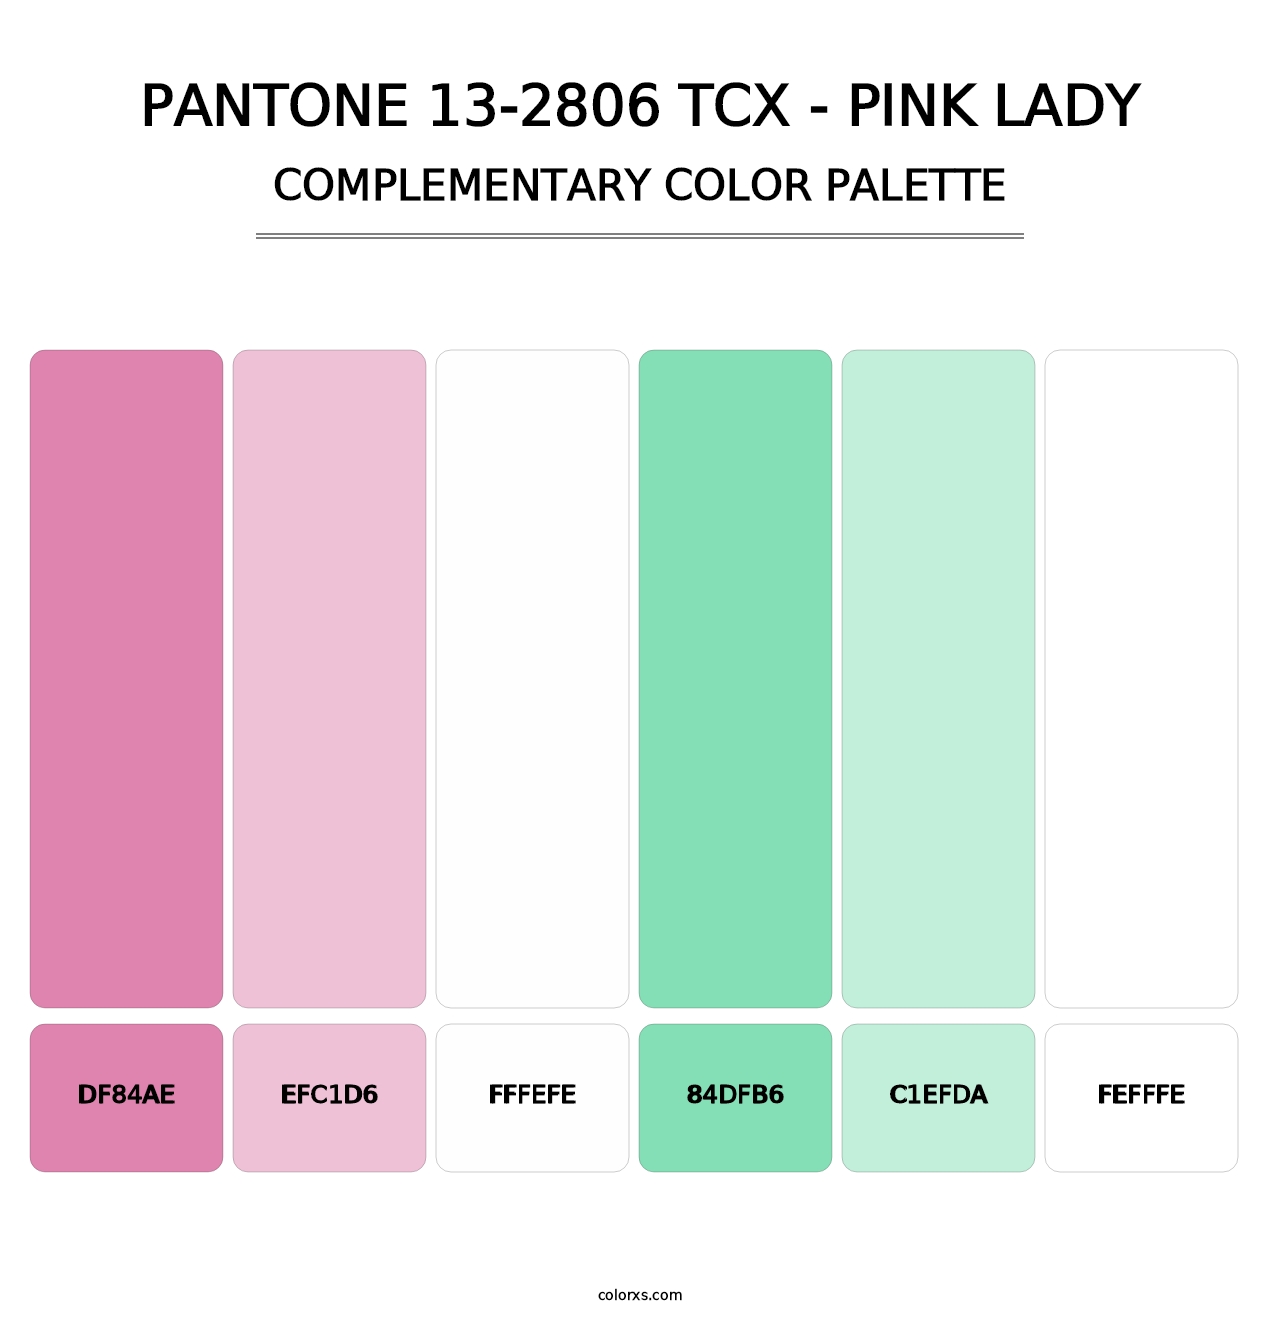 PANTONE 13-2806 TCX - Pink Lady - Complementary Color Palette